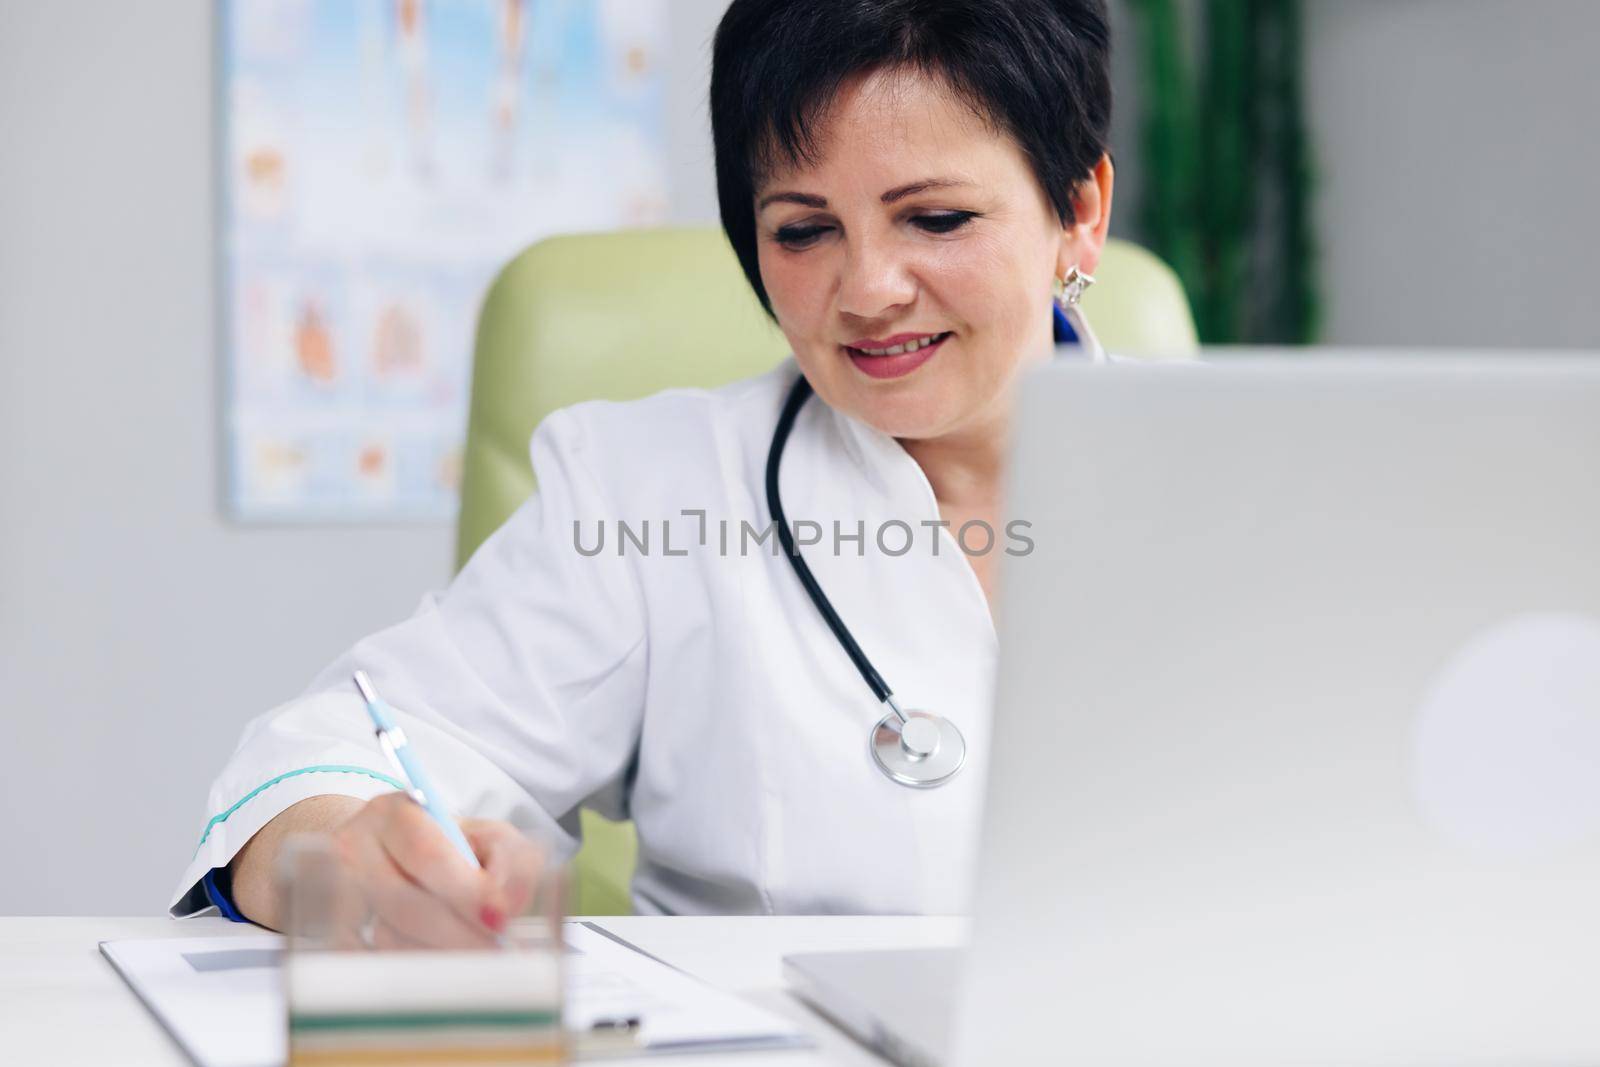 Middle aged senior head doctor in white medical coat sitting at workplace, talking to patient making video call on laptop, writing notes in paper journal.